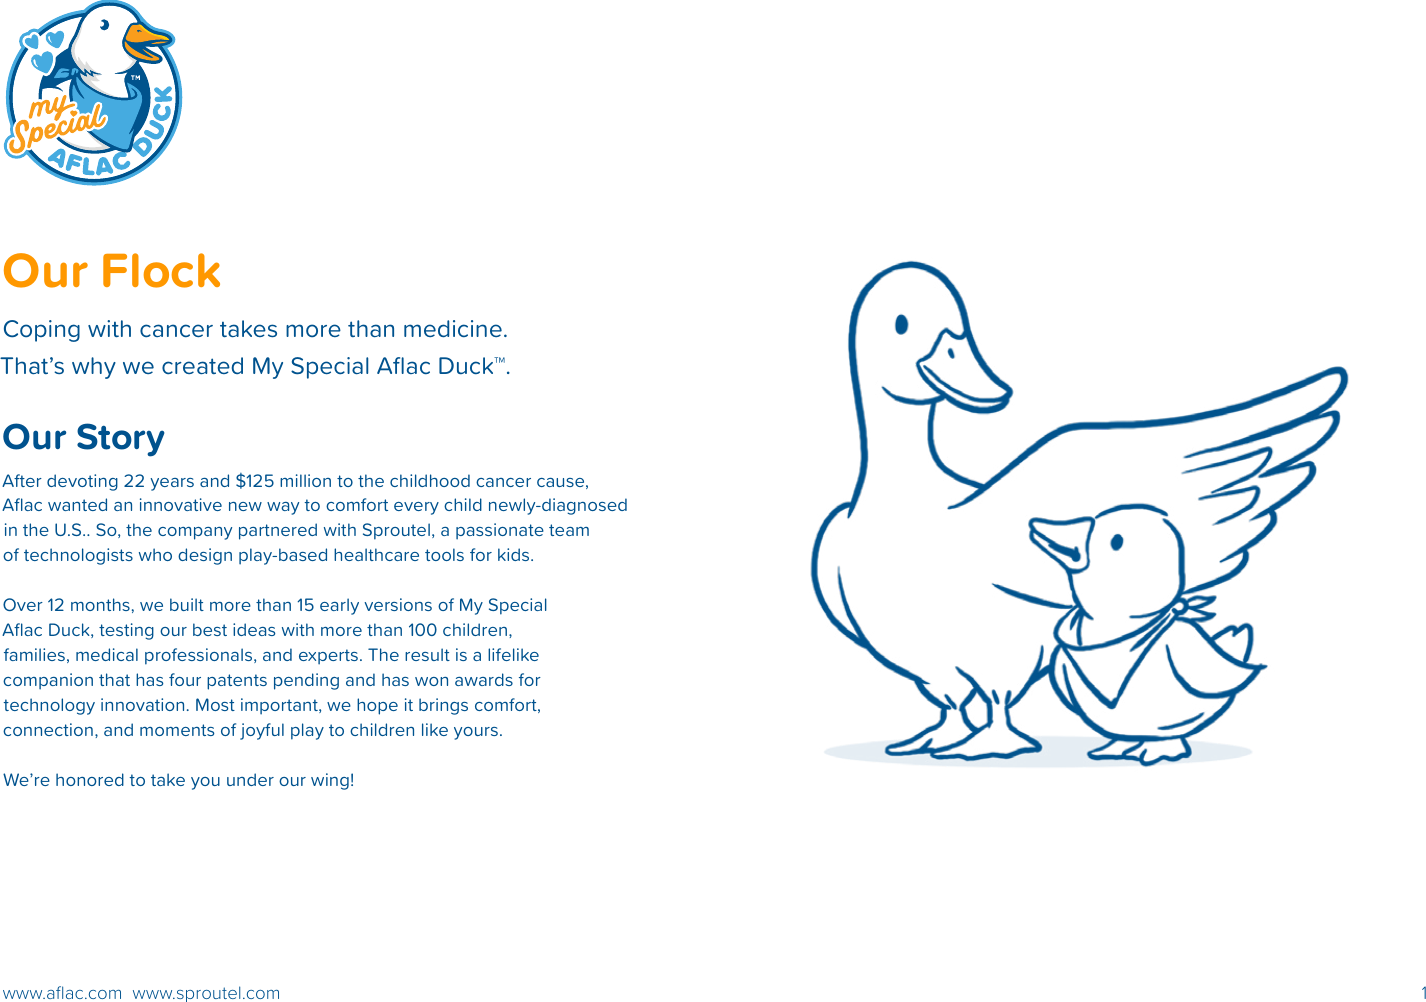 1www.aﬂac.com  www.sproutel.comOur Flock Coping with cancer takes more than medicine.  That’s why we created My Special Aﬂac Duck™. Our StoryAfter devoting 22 years and $125 million to the childhood cancer cause, Aﬂac wanted an innovative new way to comfort every child newly-diagnosed in the U.S.. So, the company partnered with Sproutel, a passionate team of technologists who design play-based healthcare tools for kids. Over 12 months, we built more than 15 early versions of My Special Aﬂac Duck, testing our best ideas with more than 100 children, families, medical professionals, and experts. The result is a lifelike companion that has four patents pending and has won awards for technology innovation. Most important, we hope it brings comfort, connection, and moments of joyful play to children like yours.We’re honored to take you under our wing!